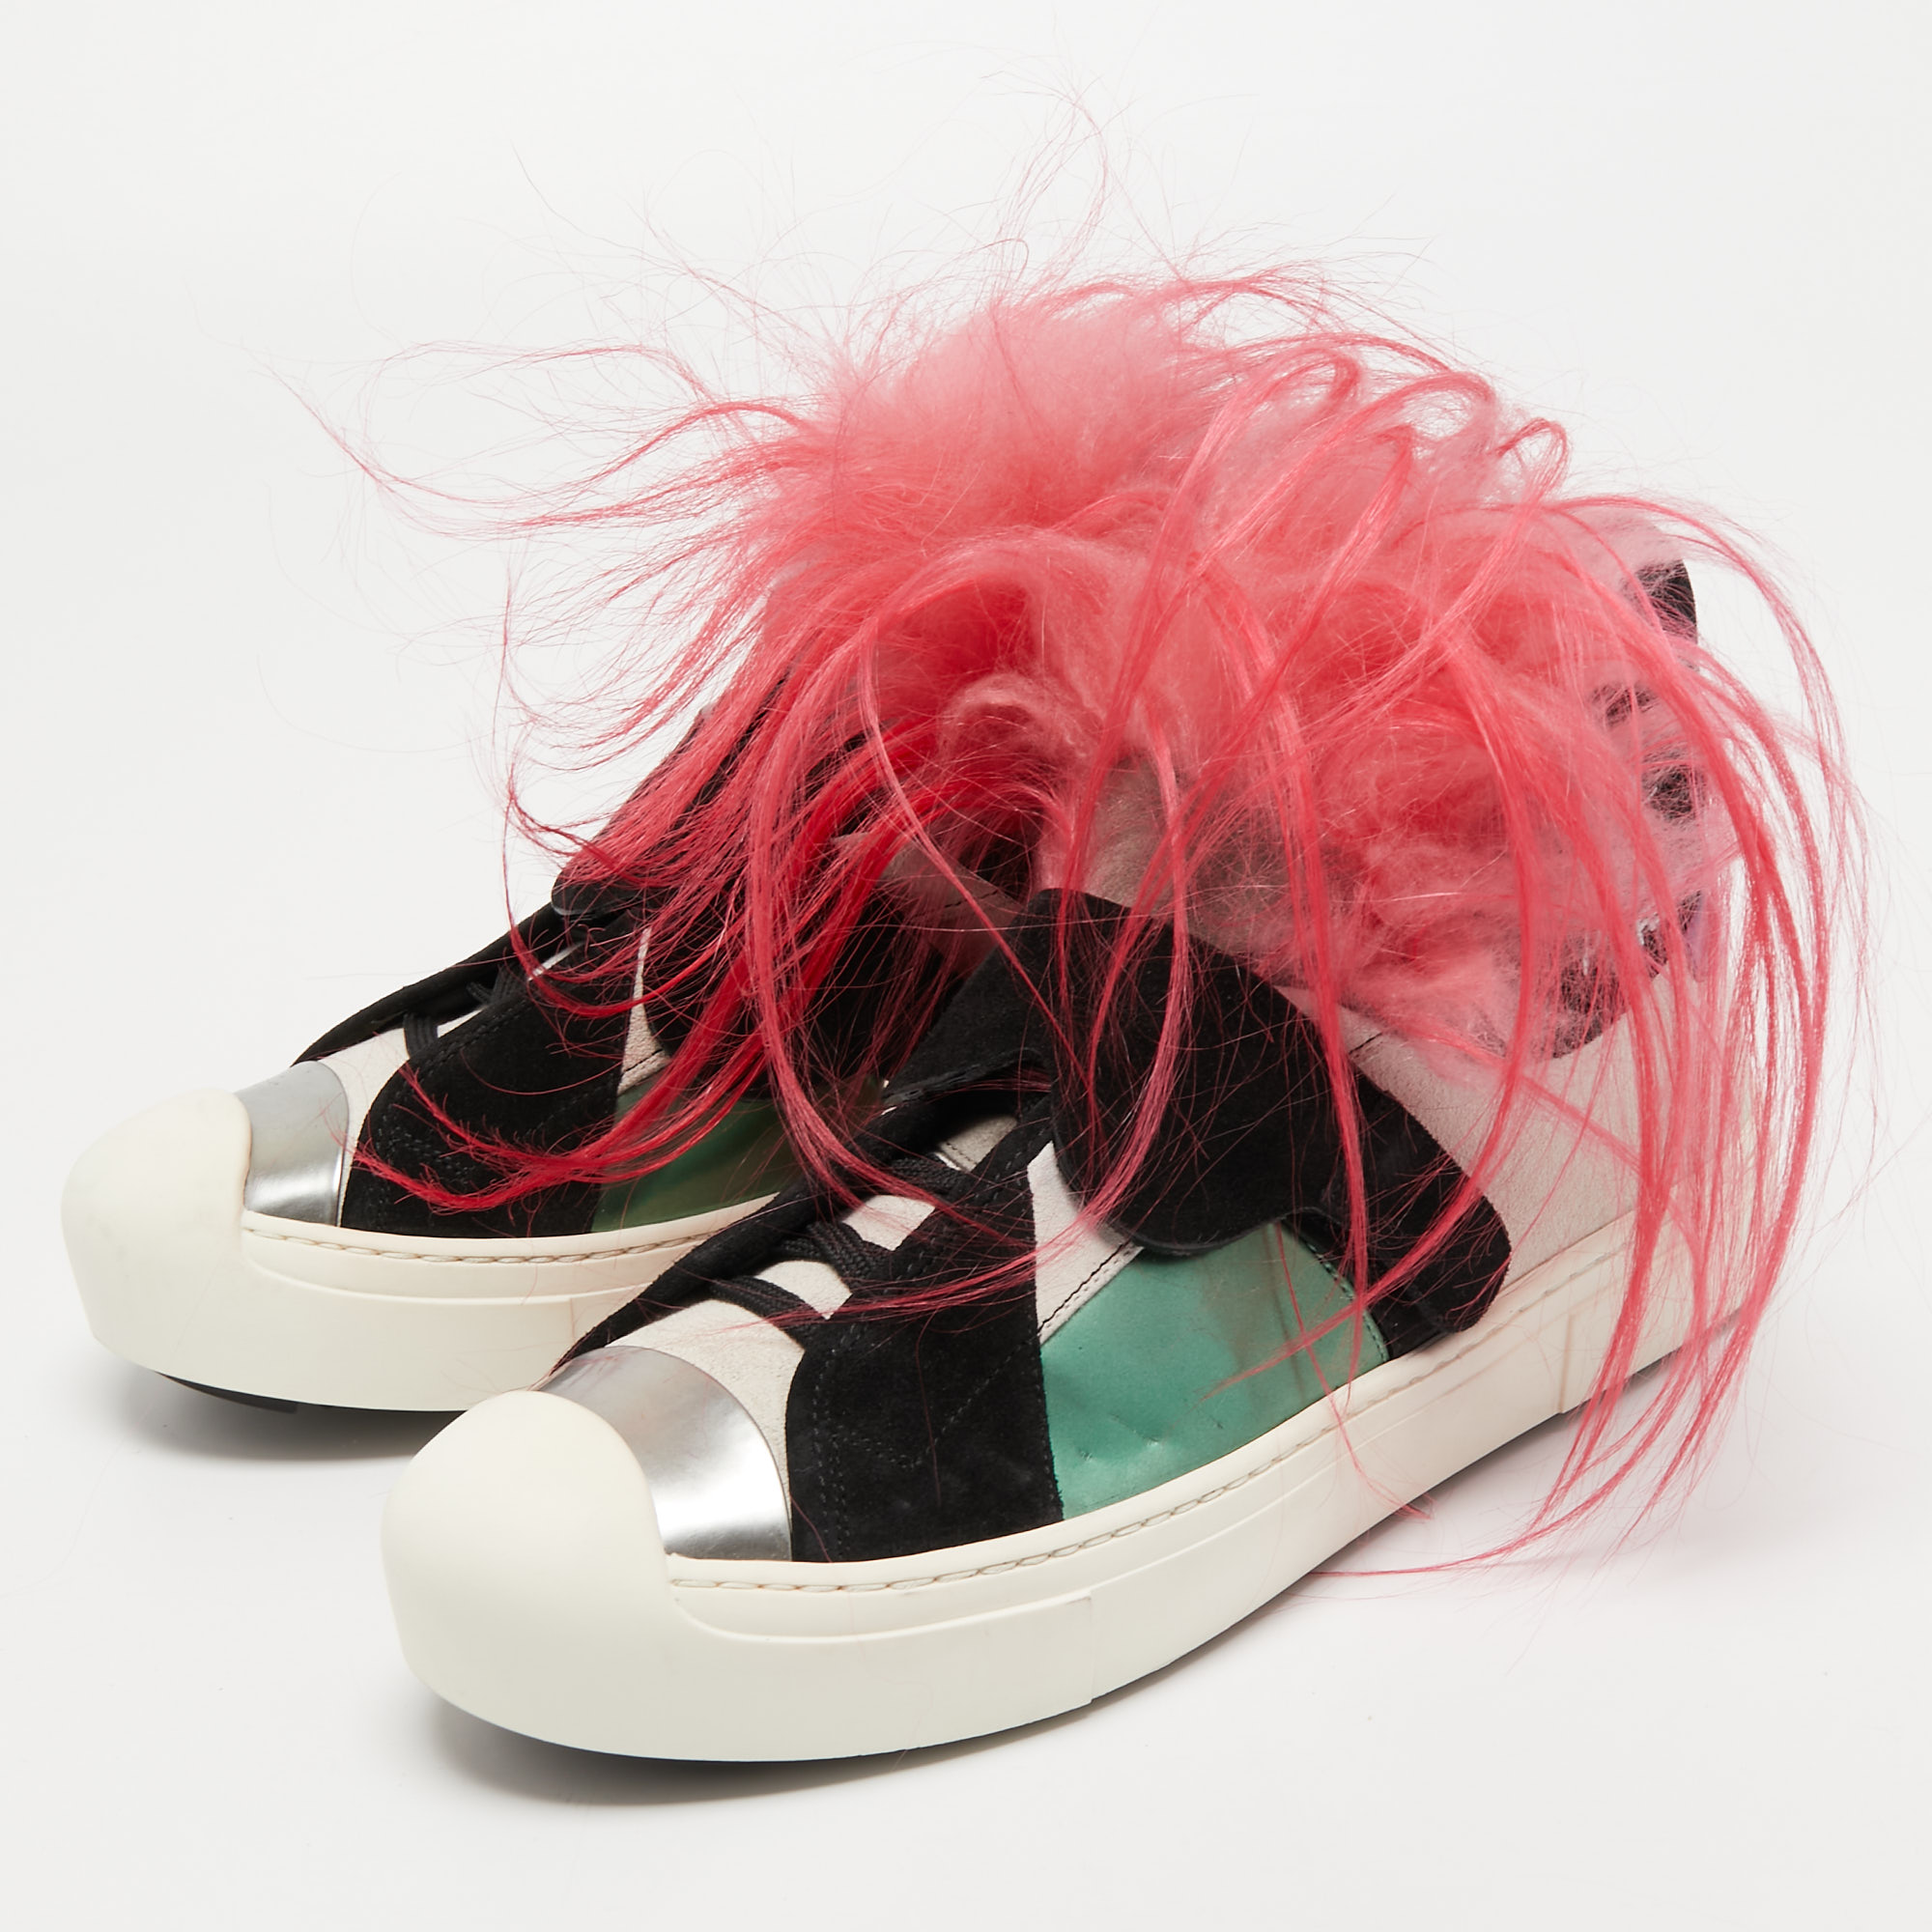 

Fendi Multicolor Leather, Suede and Fur Karlito Sneakers Size